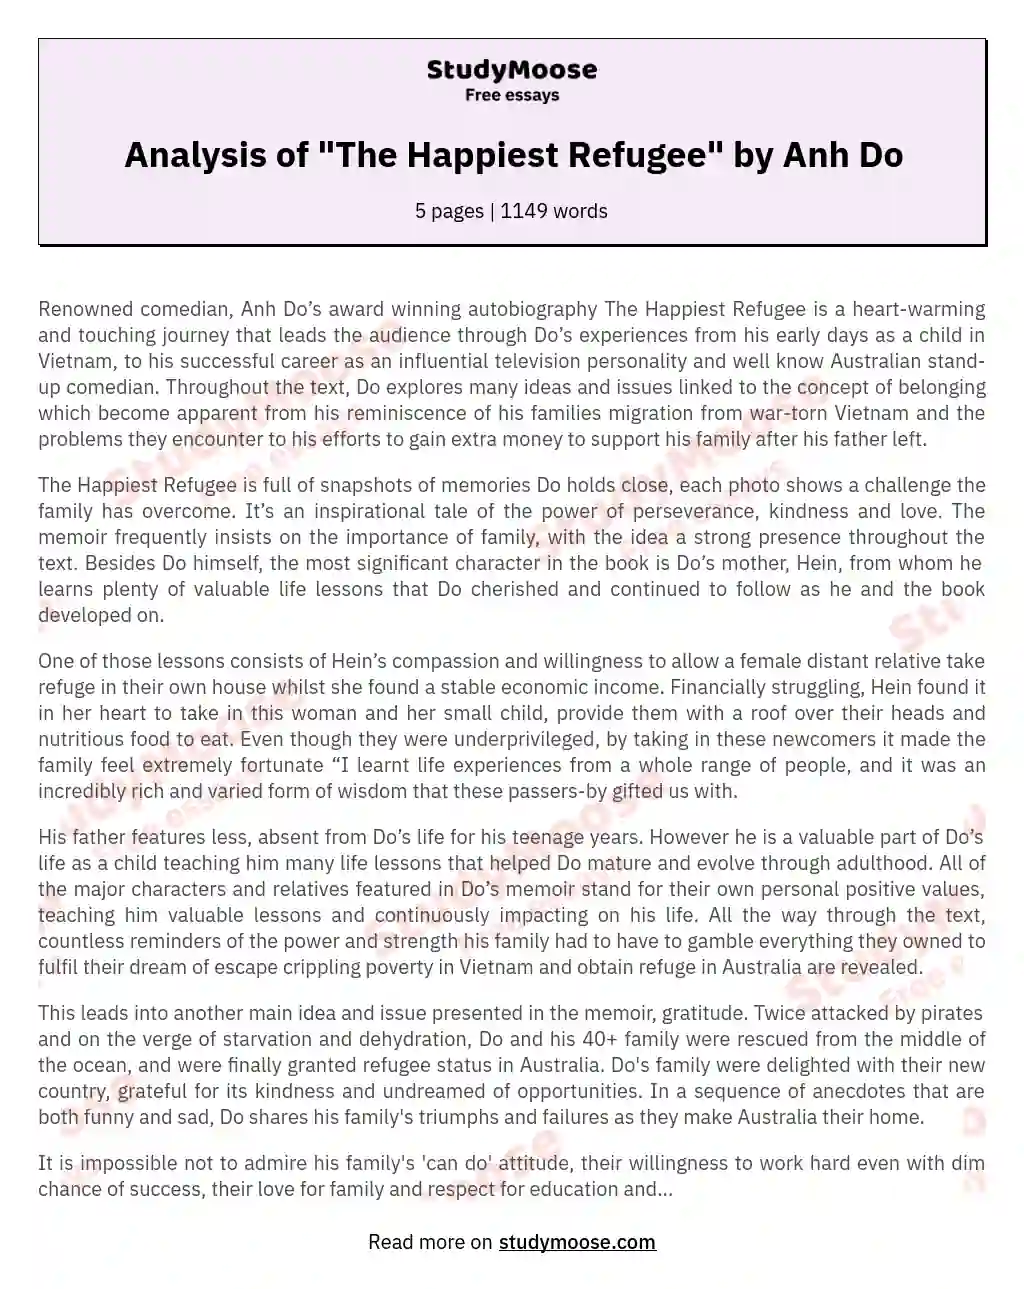 Analysis of "The Happiest Refugee" by Anh Do essay